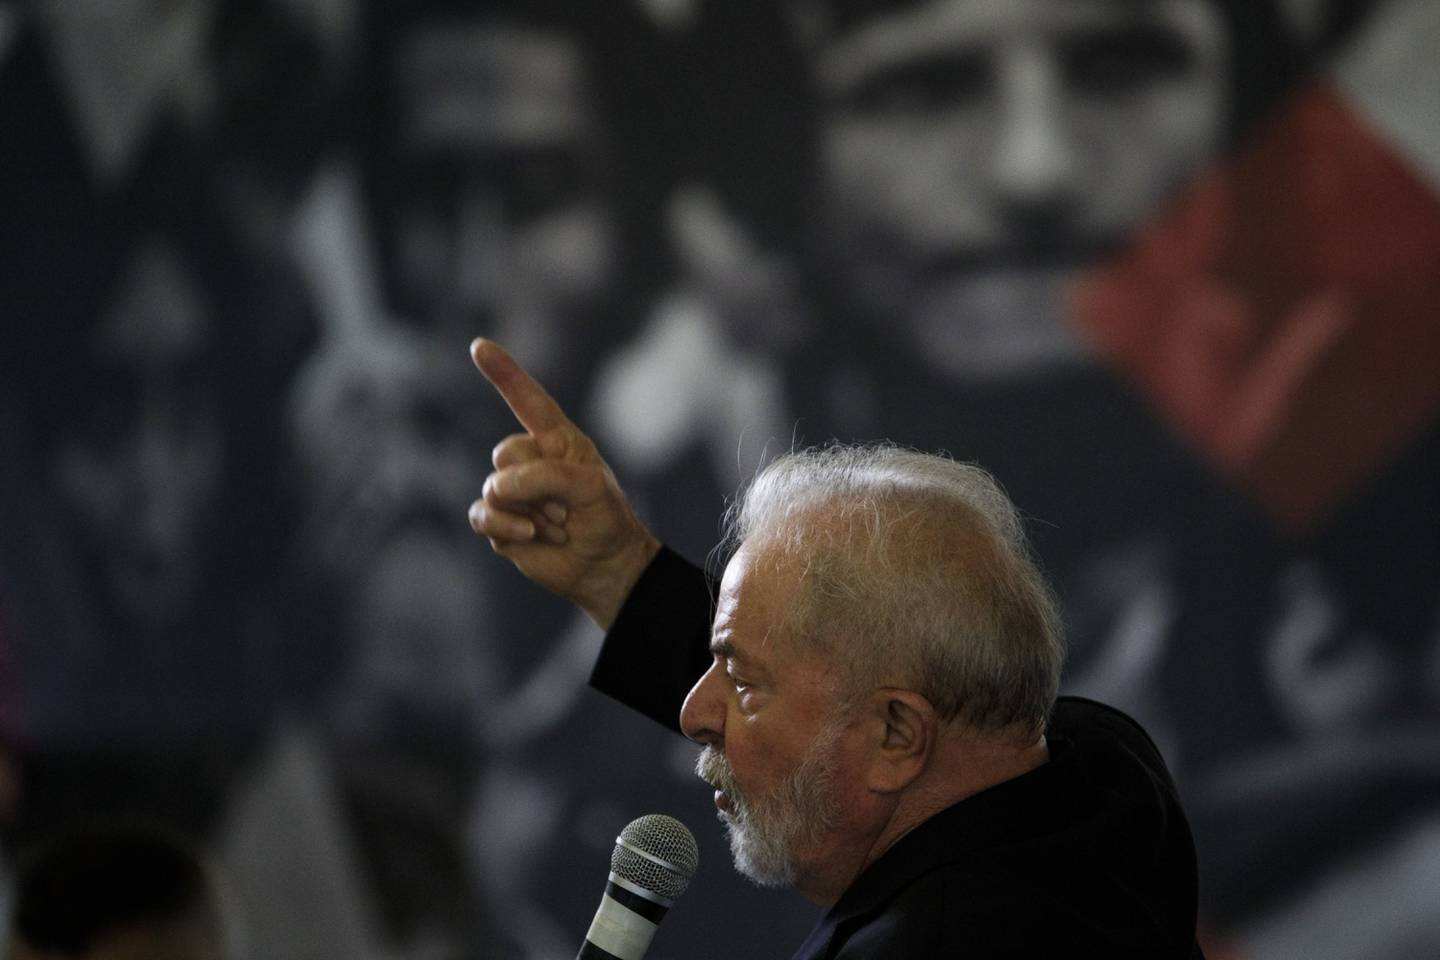 Former President Lula Speaks At The Metalworkers Union Headquarters.